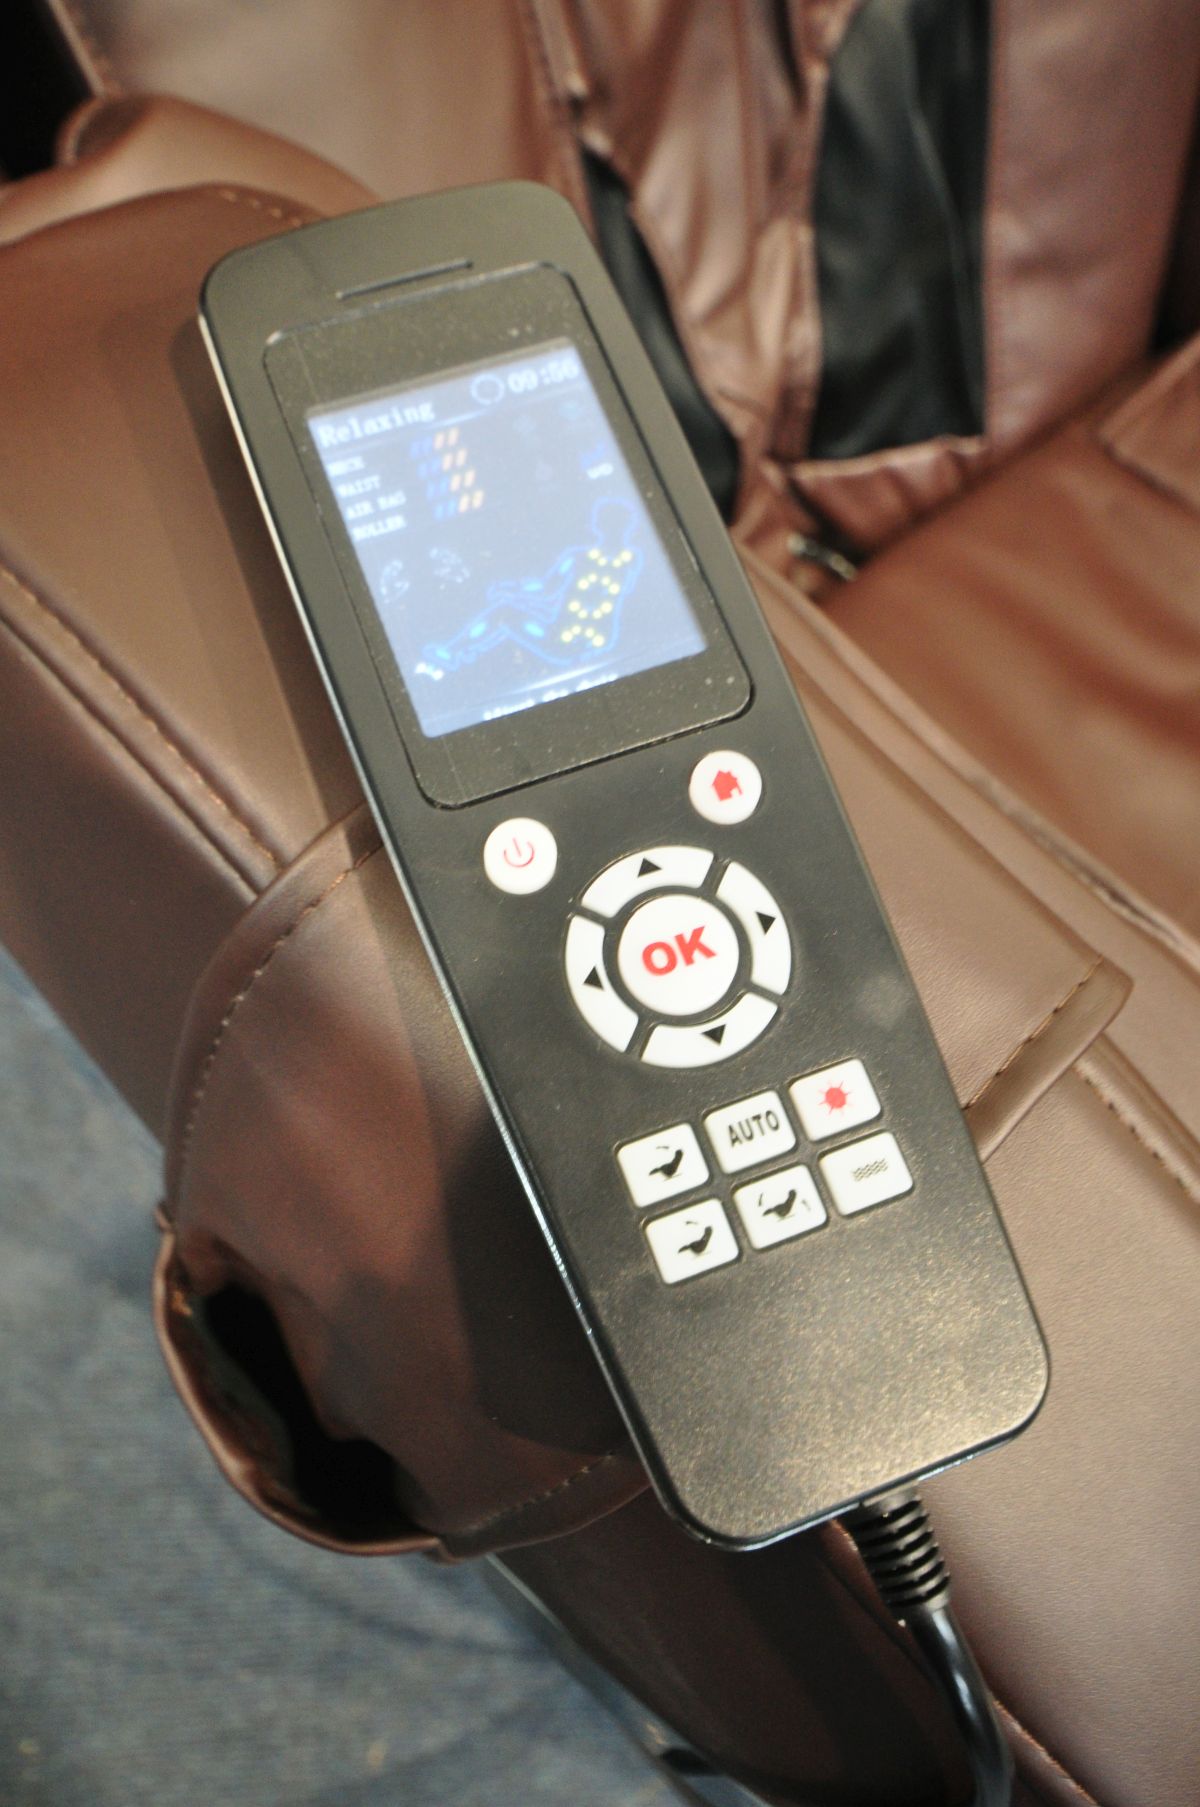 A REAL RELAX FAVOR-03 BROWN LEATHERETTE MASSAGE CHAIR - Image 3 of 3